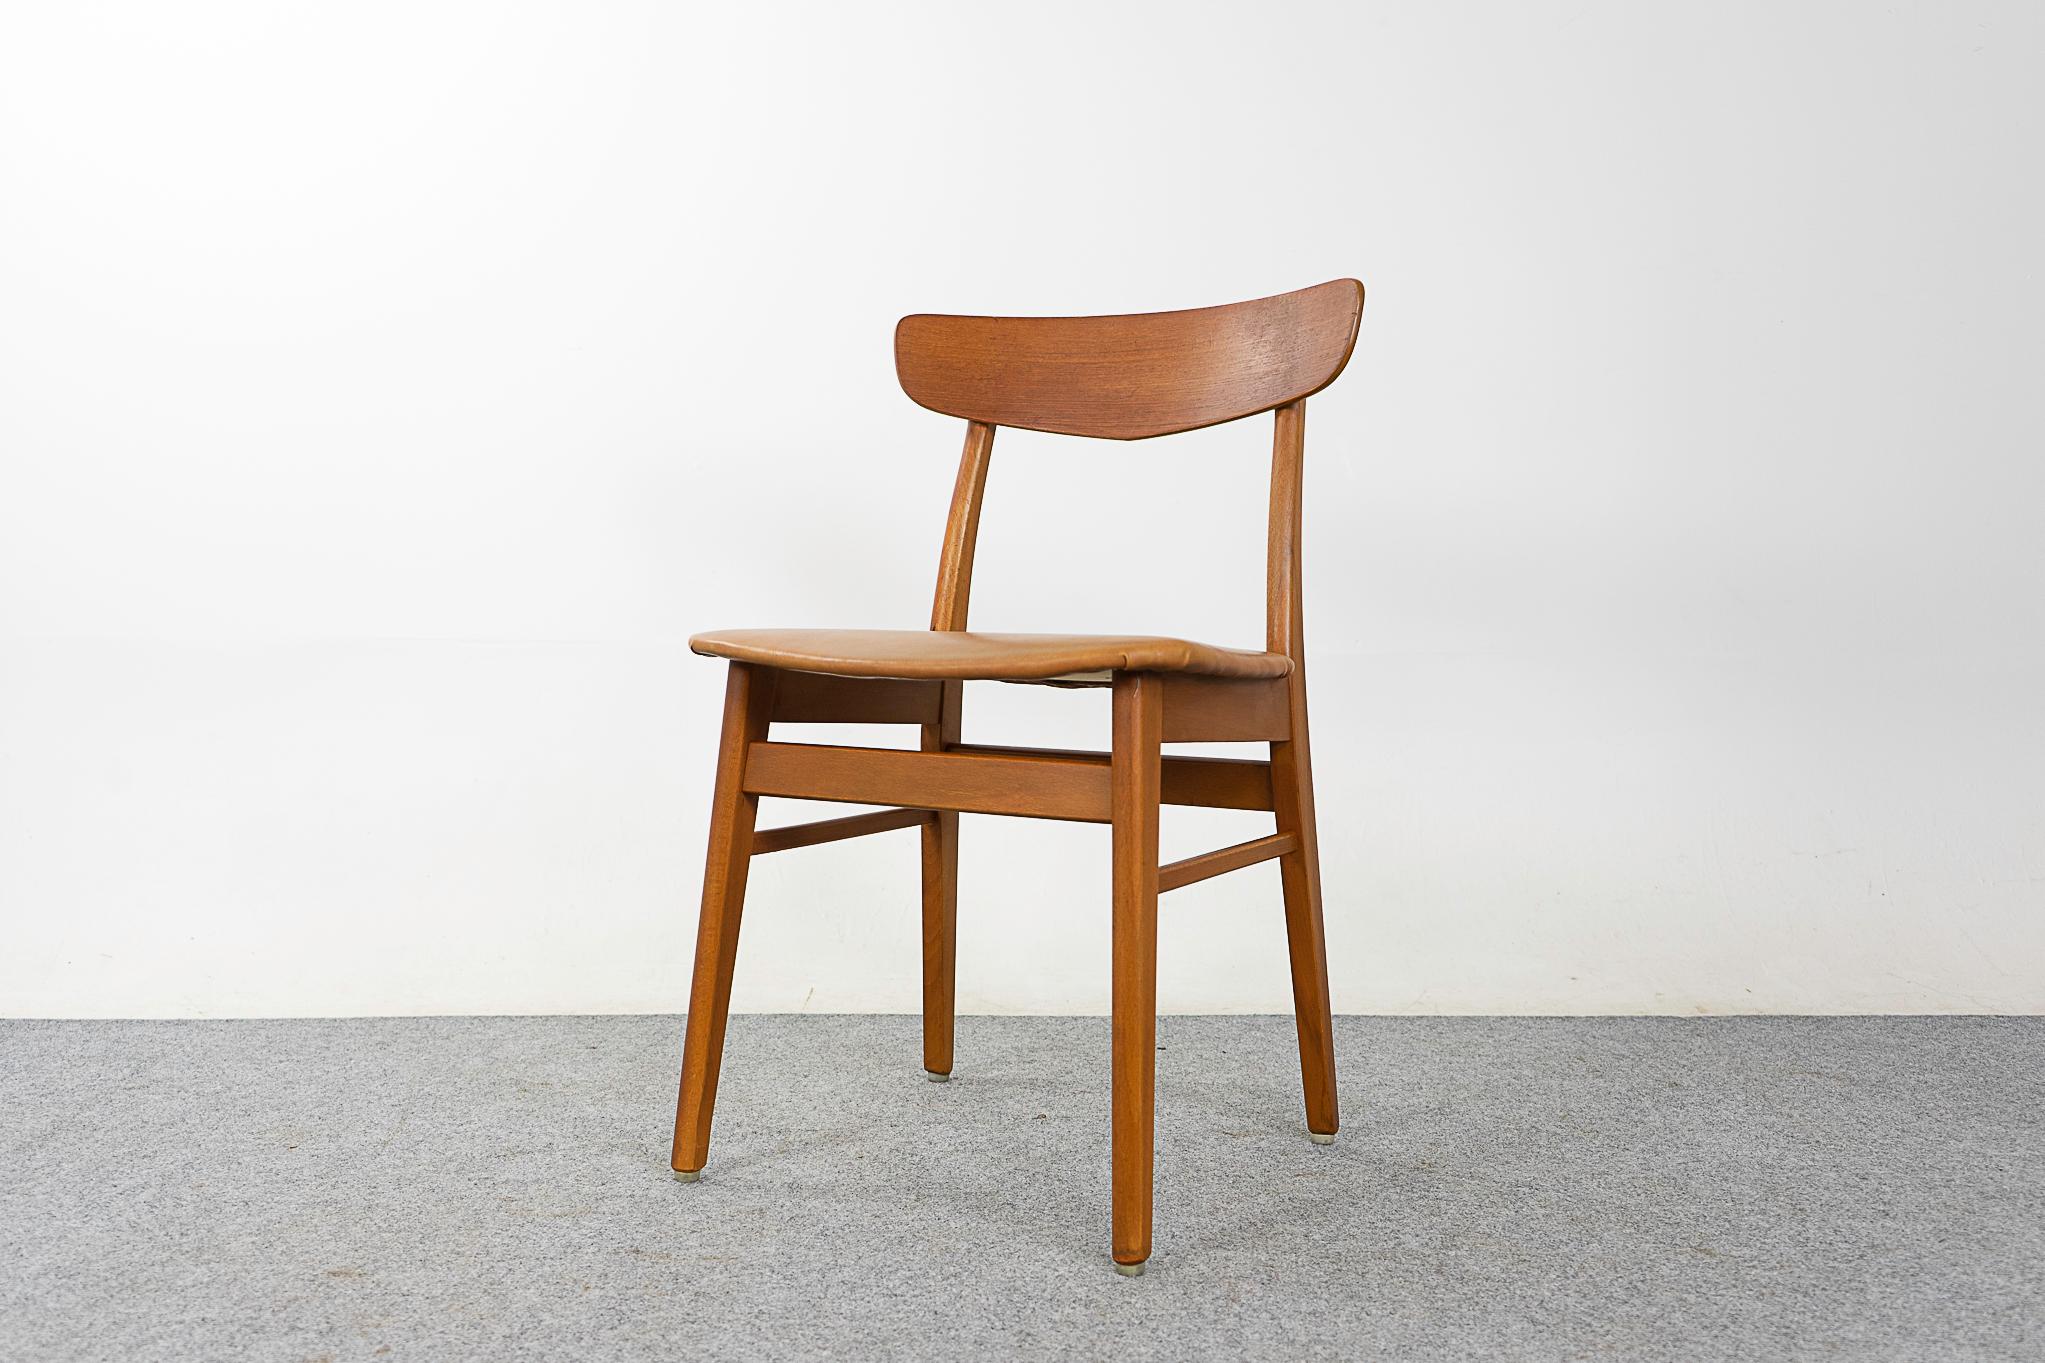 Teak & beech mid-century dining chair, circa 1960's. Beautifully curved backrests and generous seat design provide support and comfort. Solid wood frame with cross braces for stability and support. Removable seat pad makes reupholstering very easy.